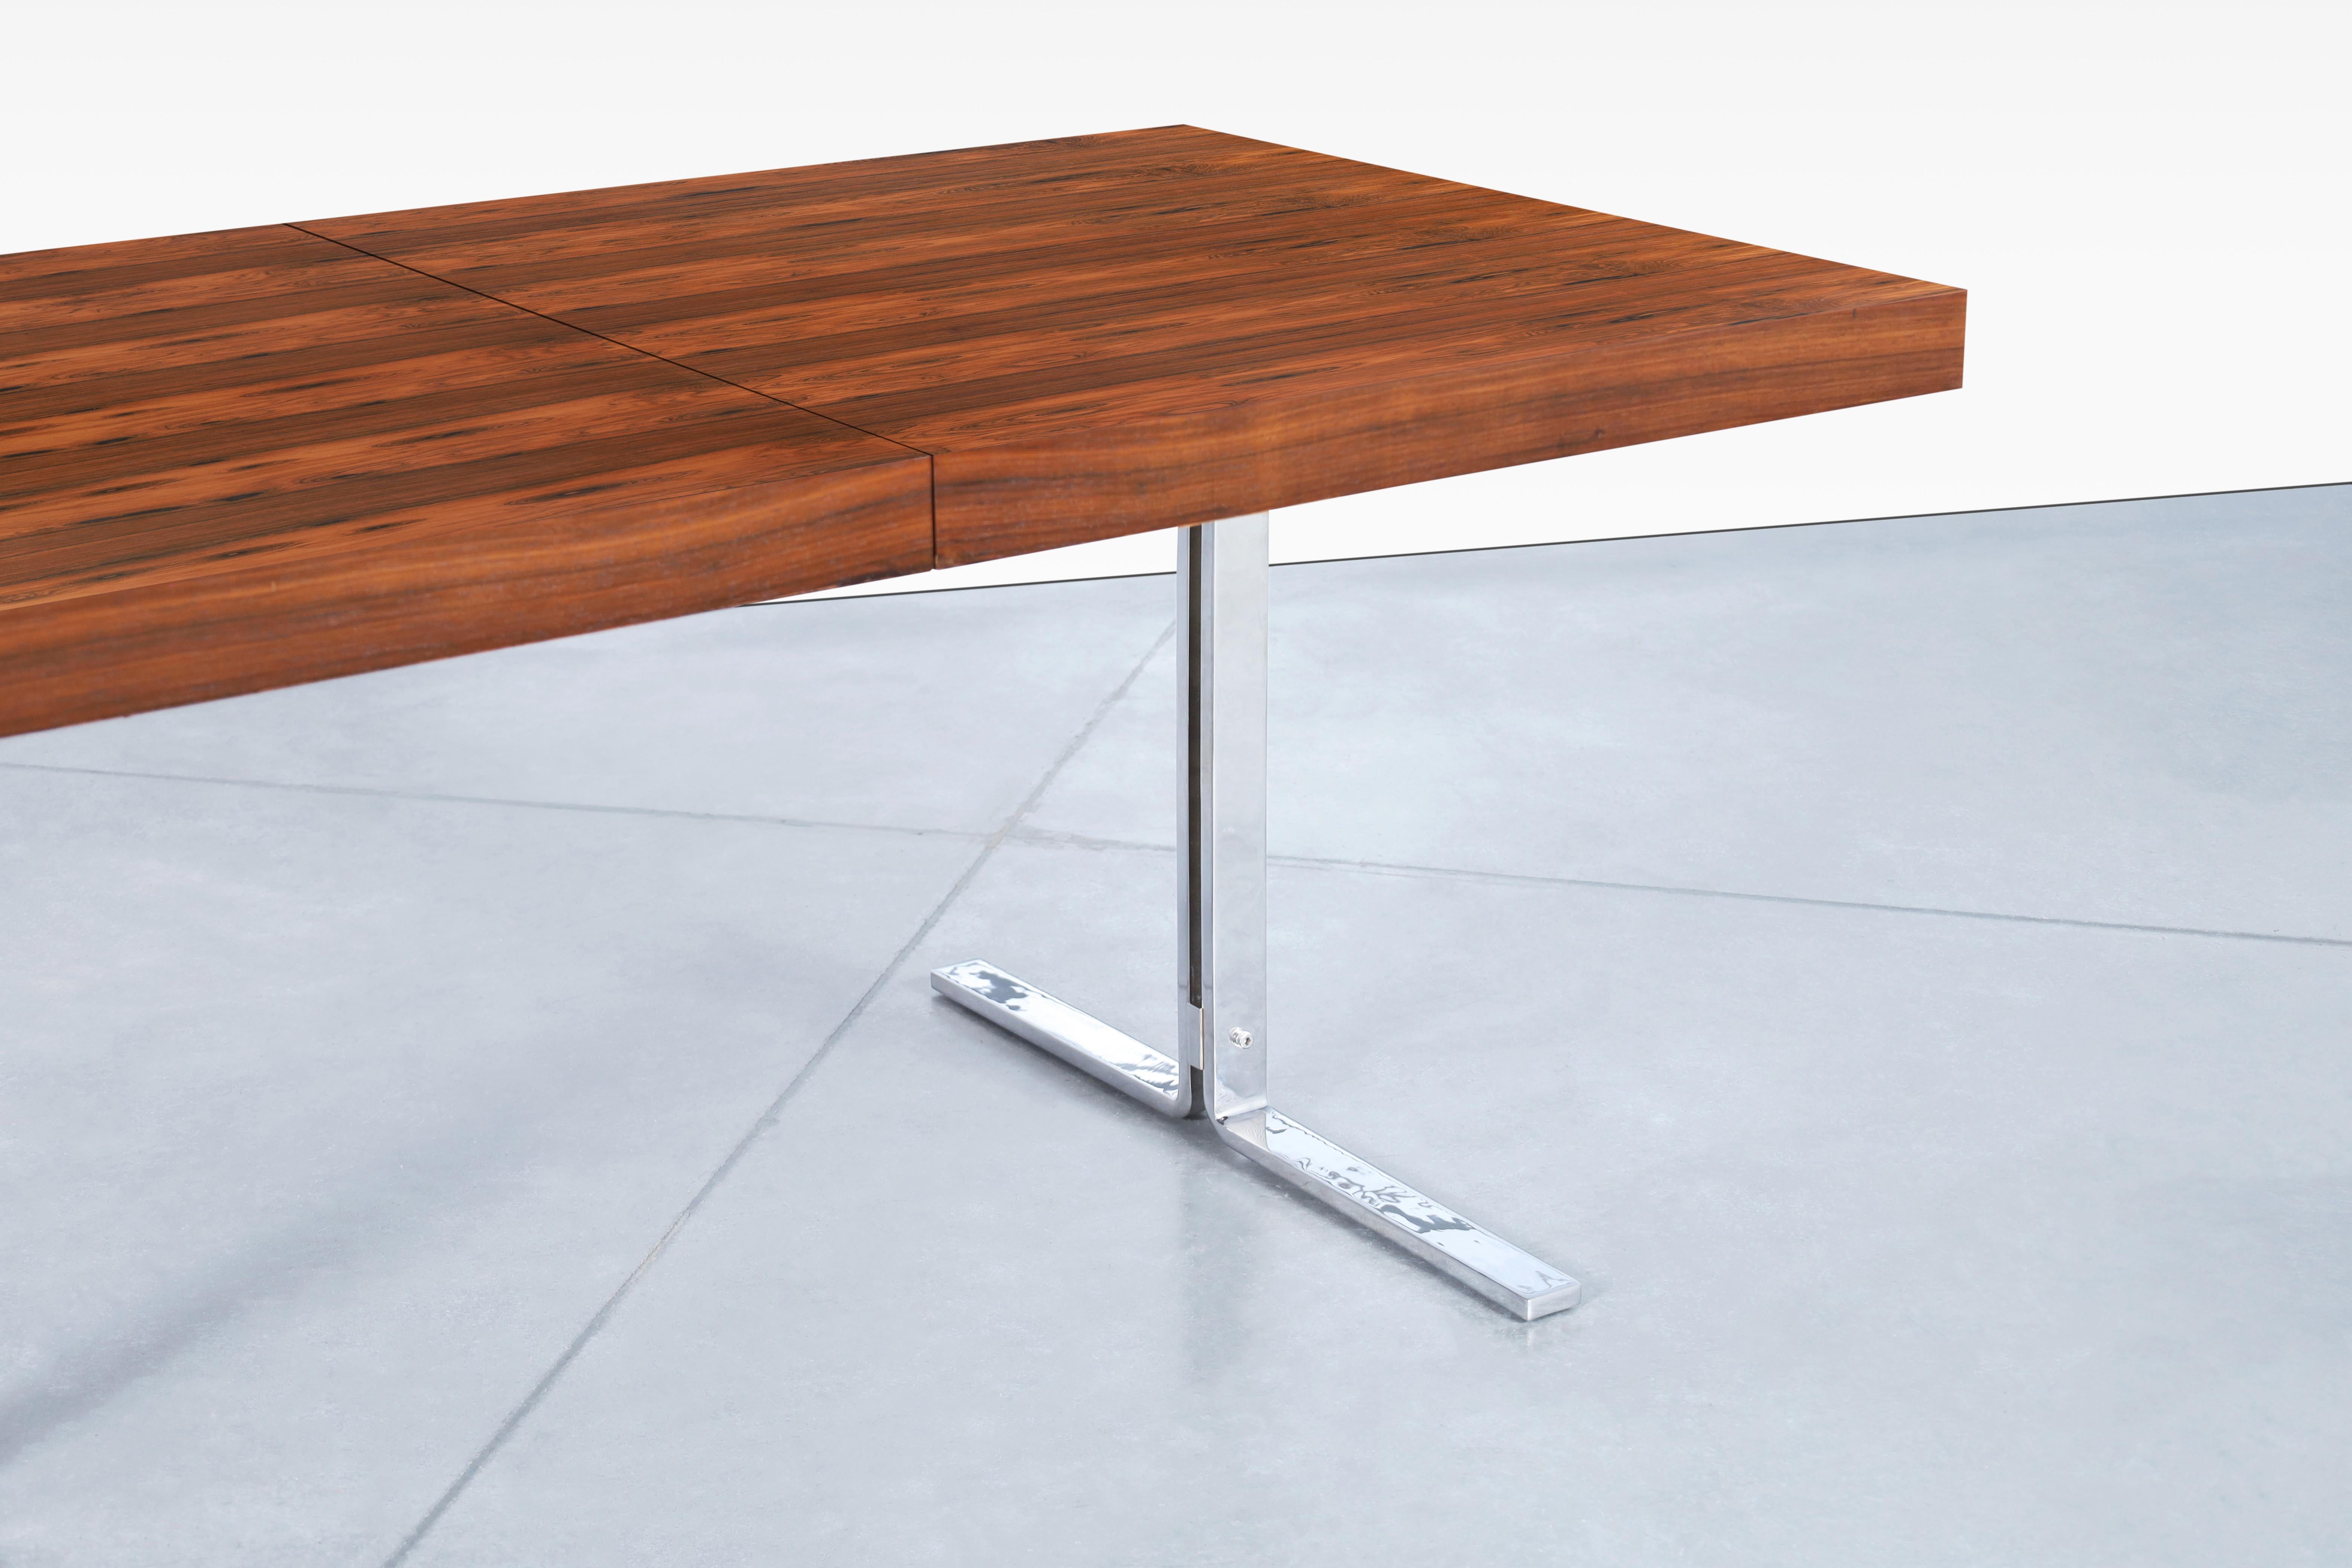 Mid-20th Century Danish Modern Rosewood Dining Table by Poul Nørreklit for Georg Petersens For Sale